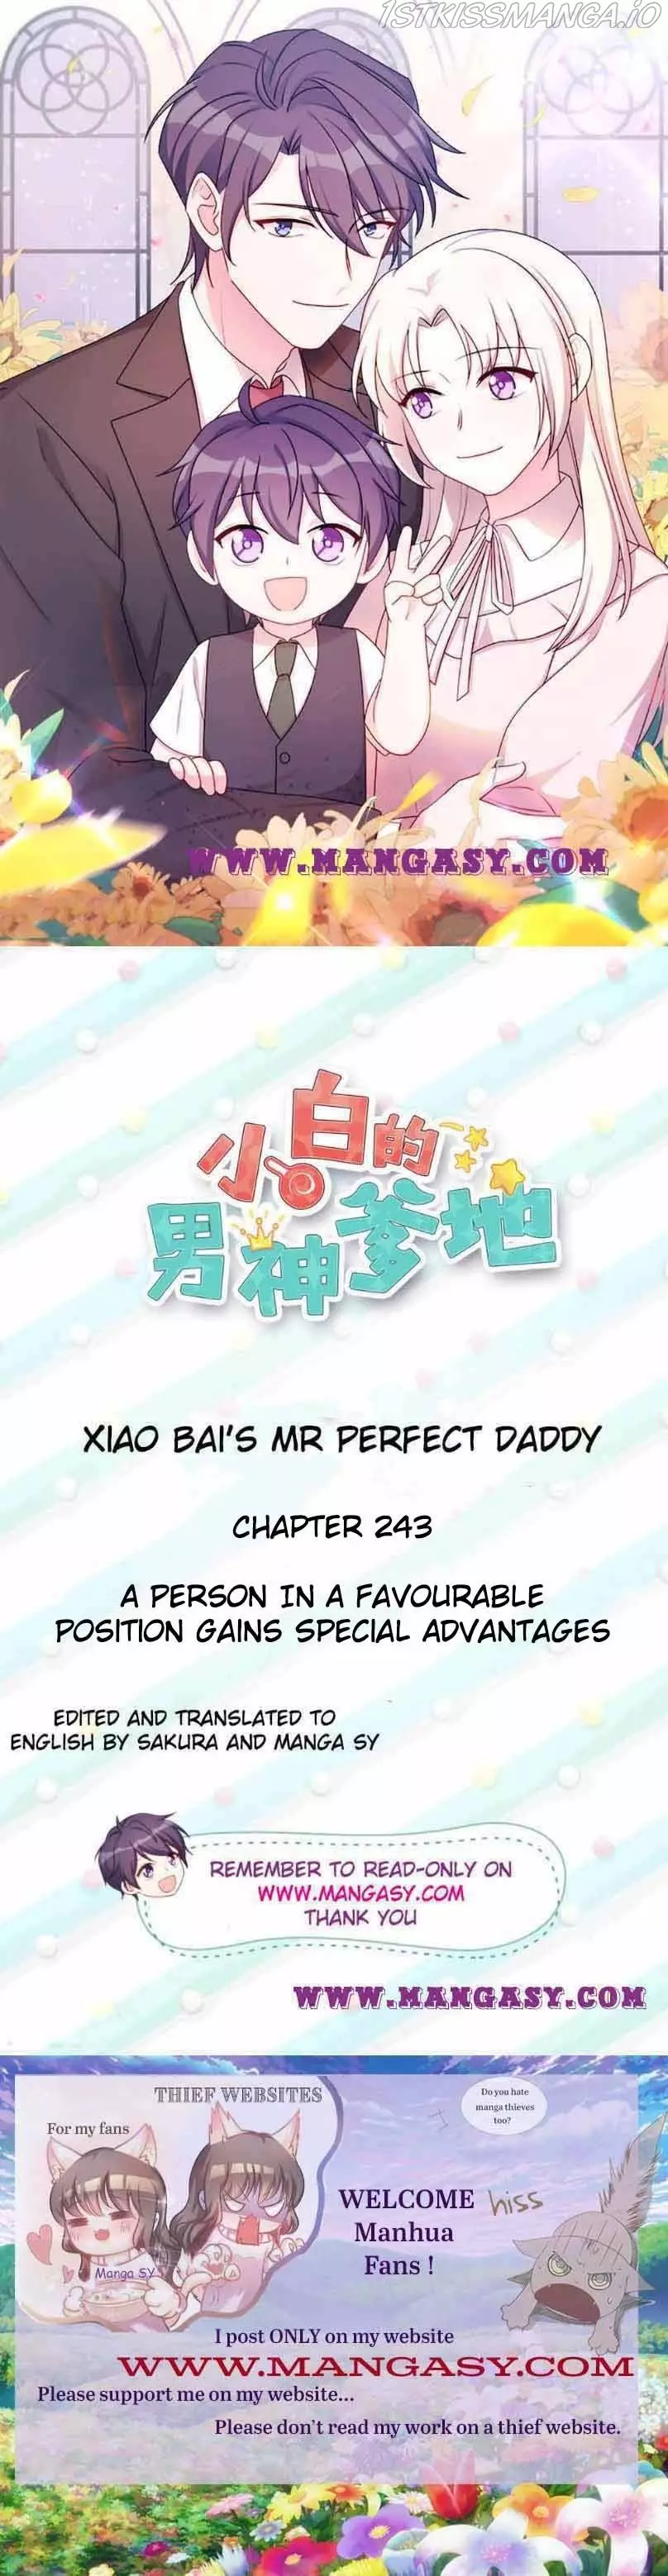 Xiao Bai’S Father Is A Wonderful Person - 243 page 1-8c2c219e